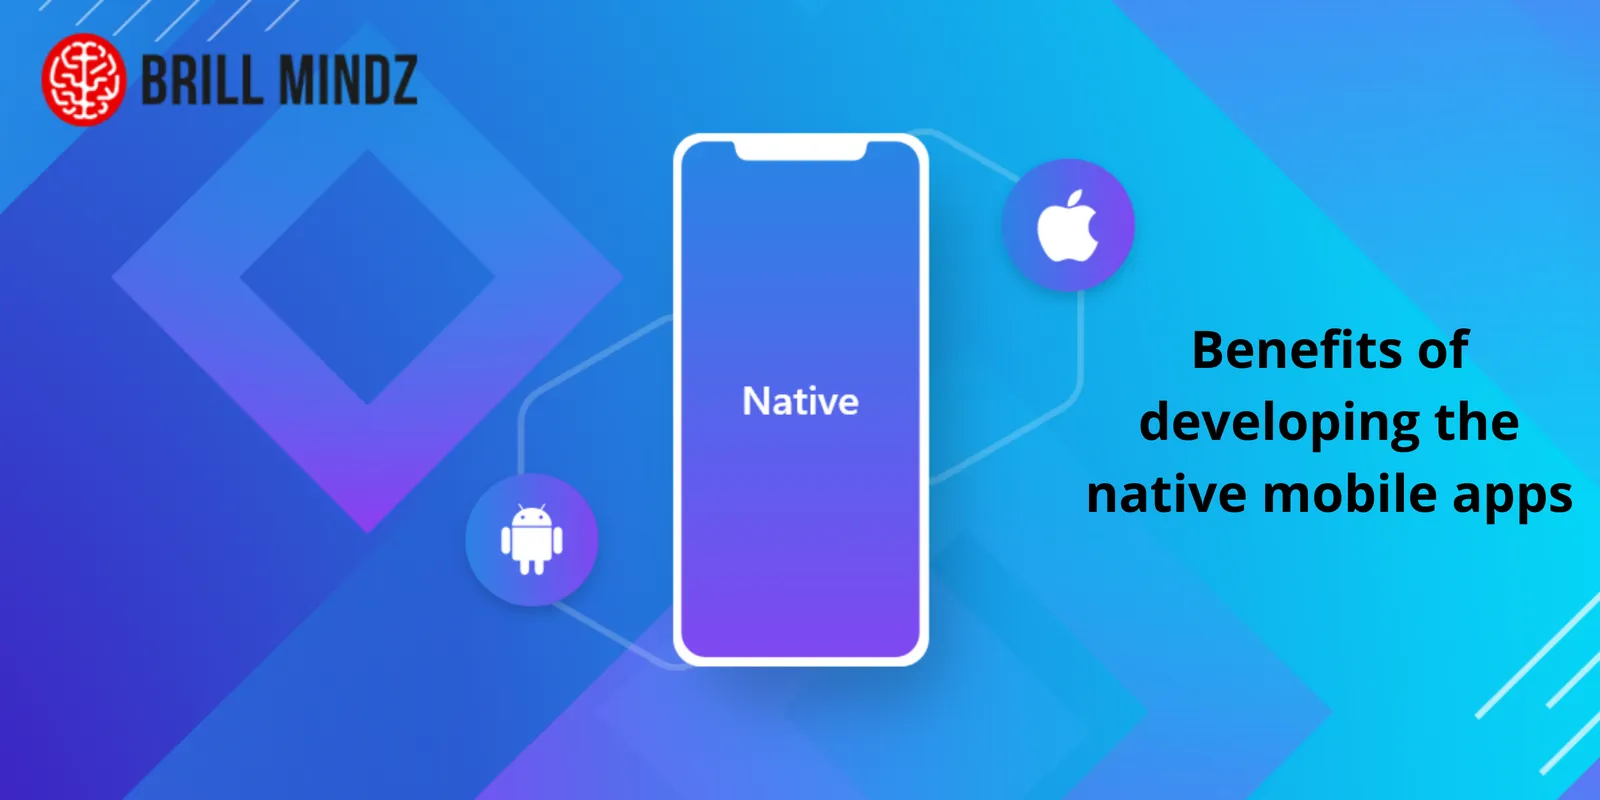 What are the advantages of native mobile apps